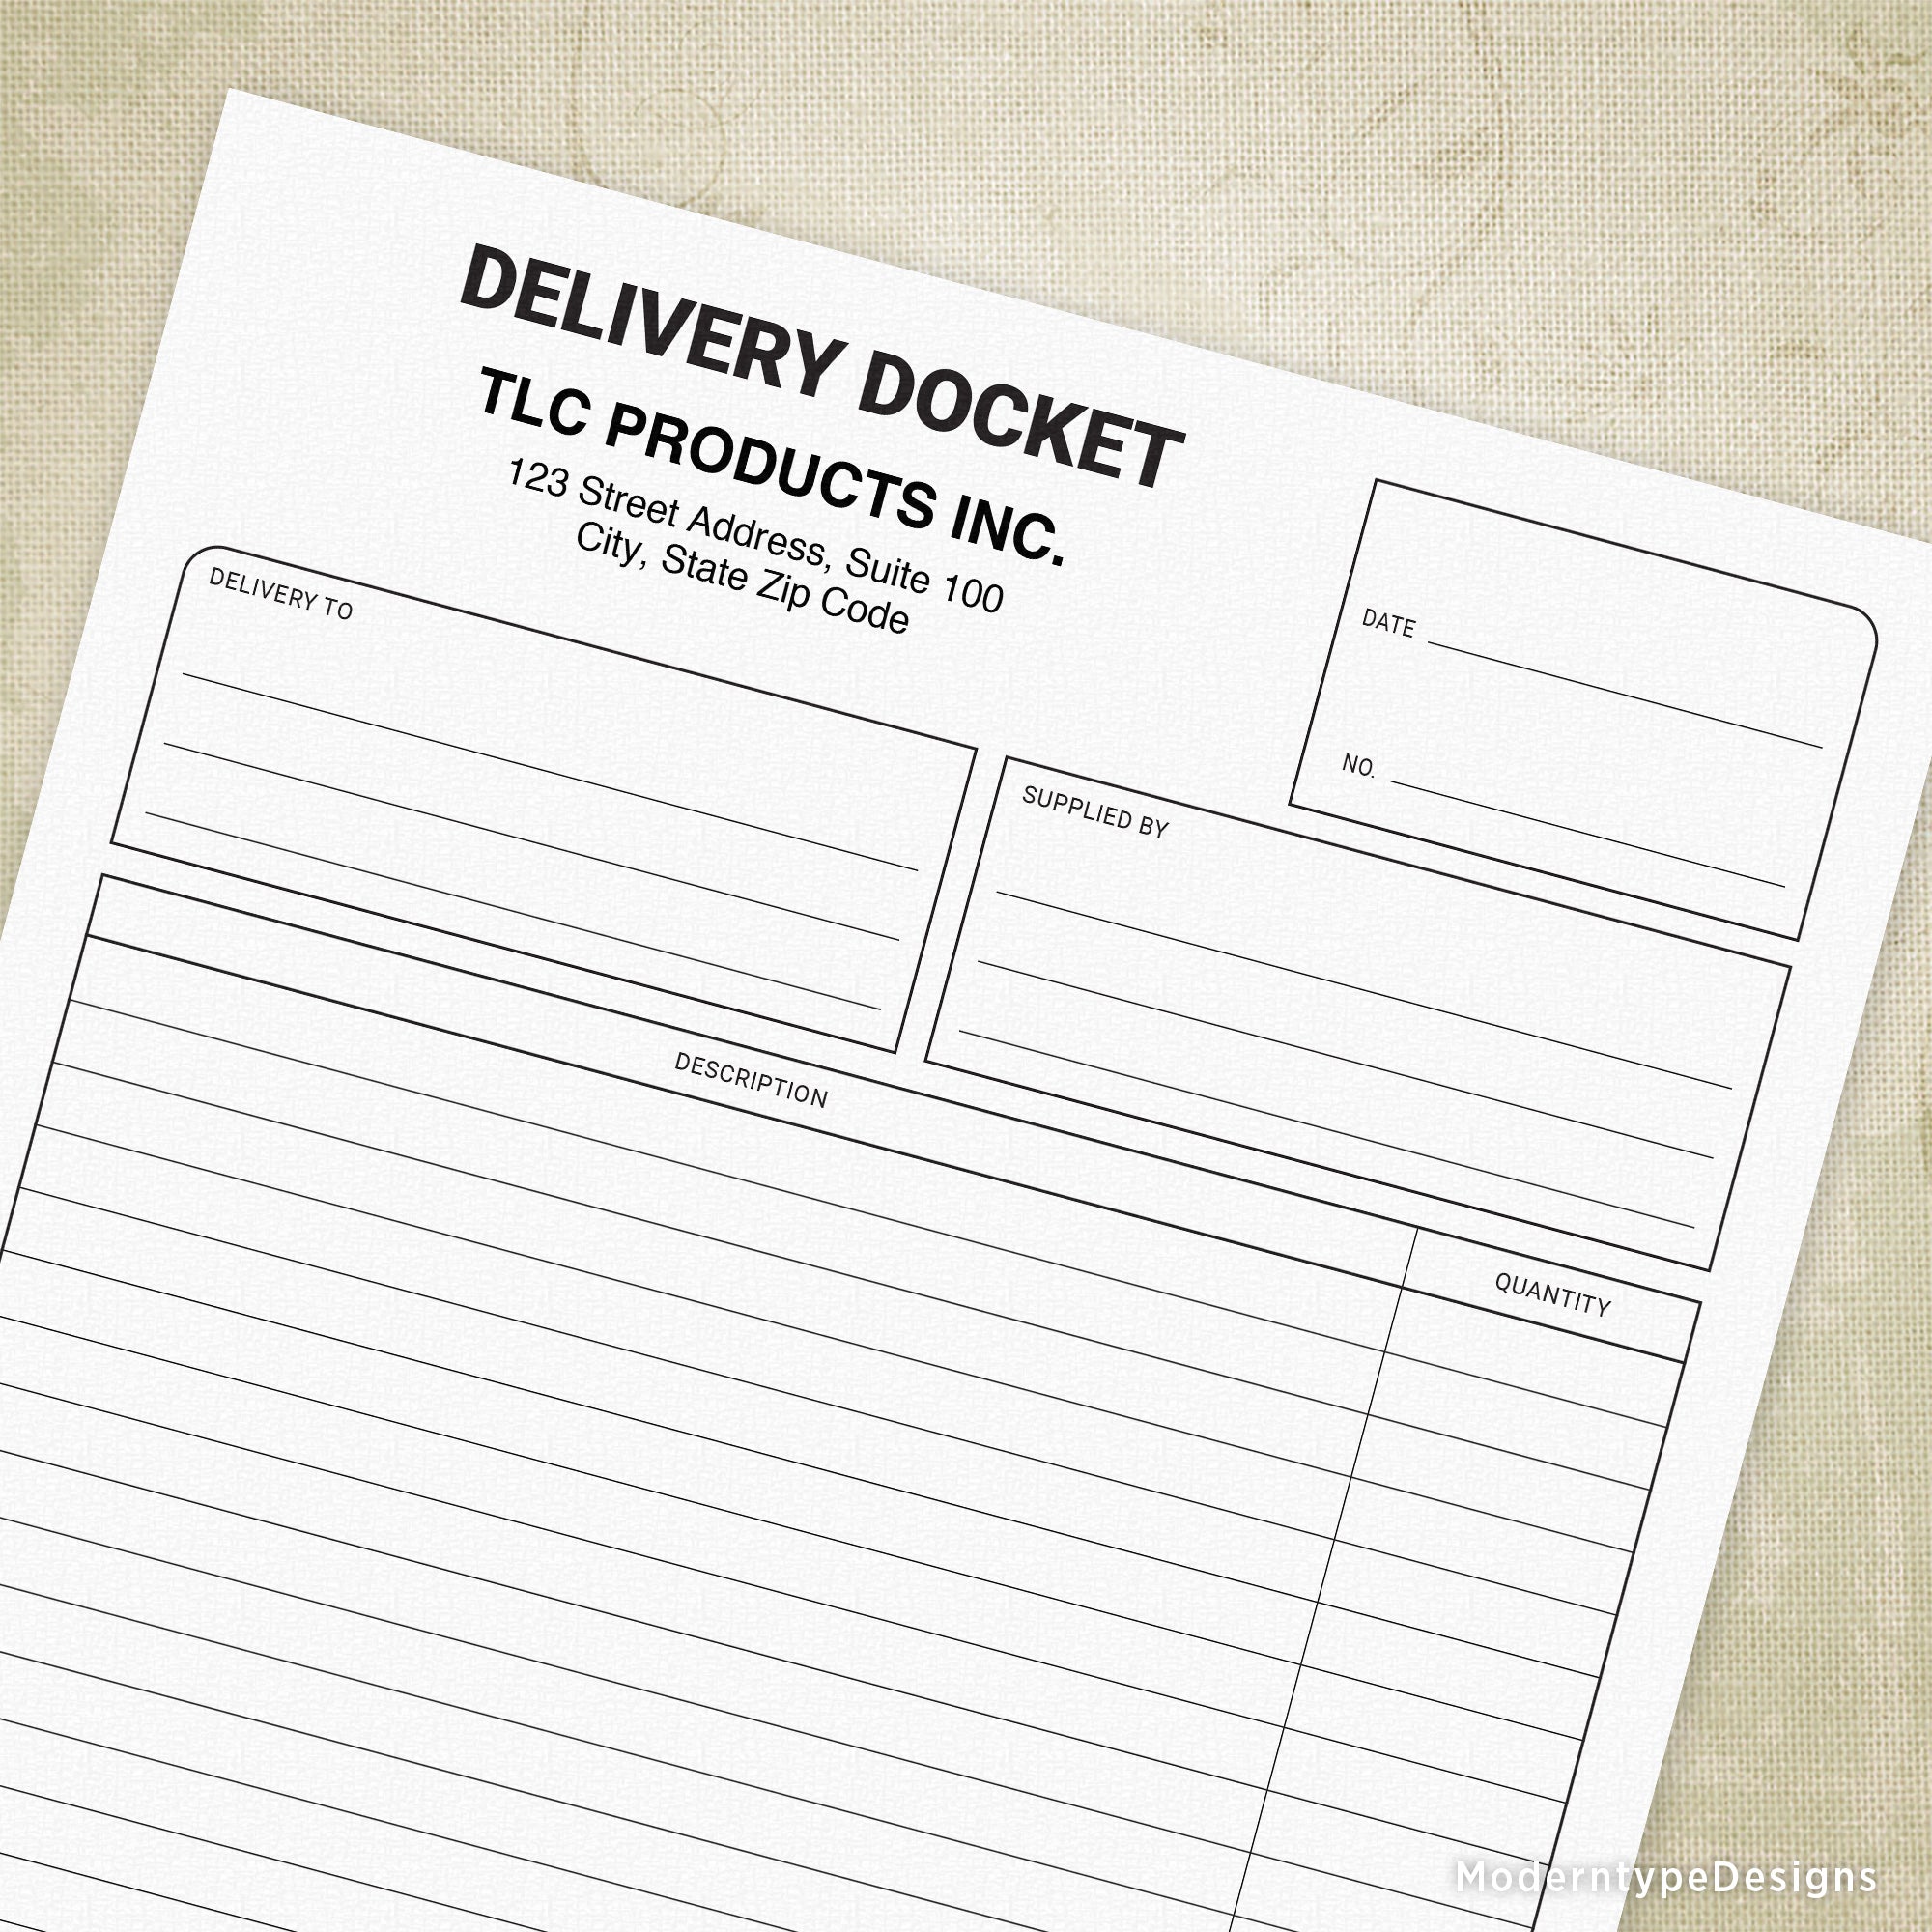 Delivery Docket Printable Form with Lines, Personalized, #1